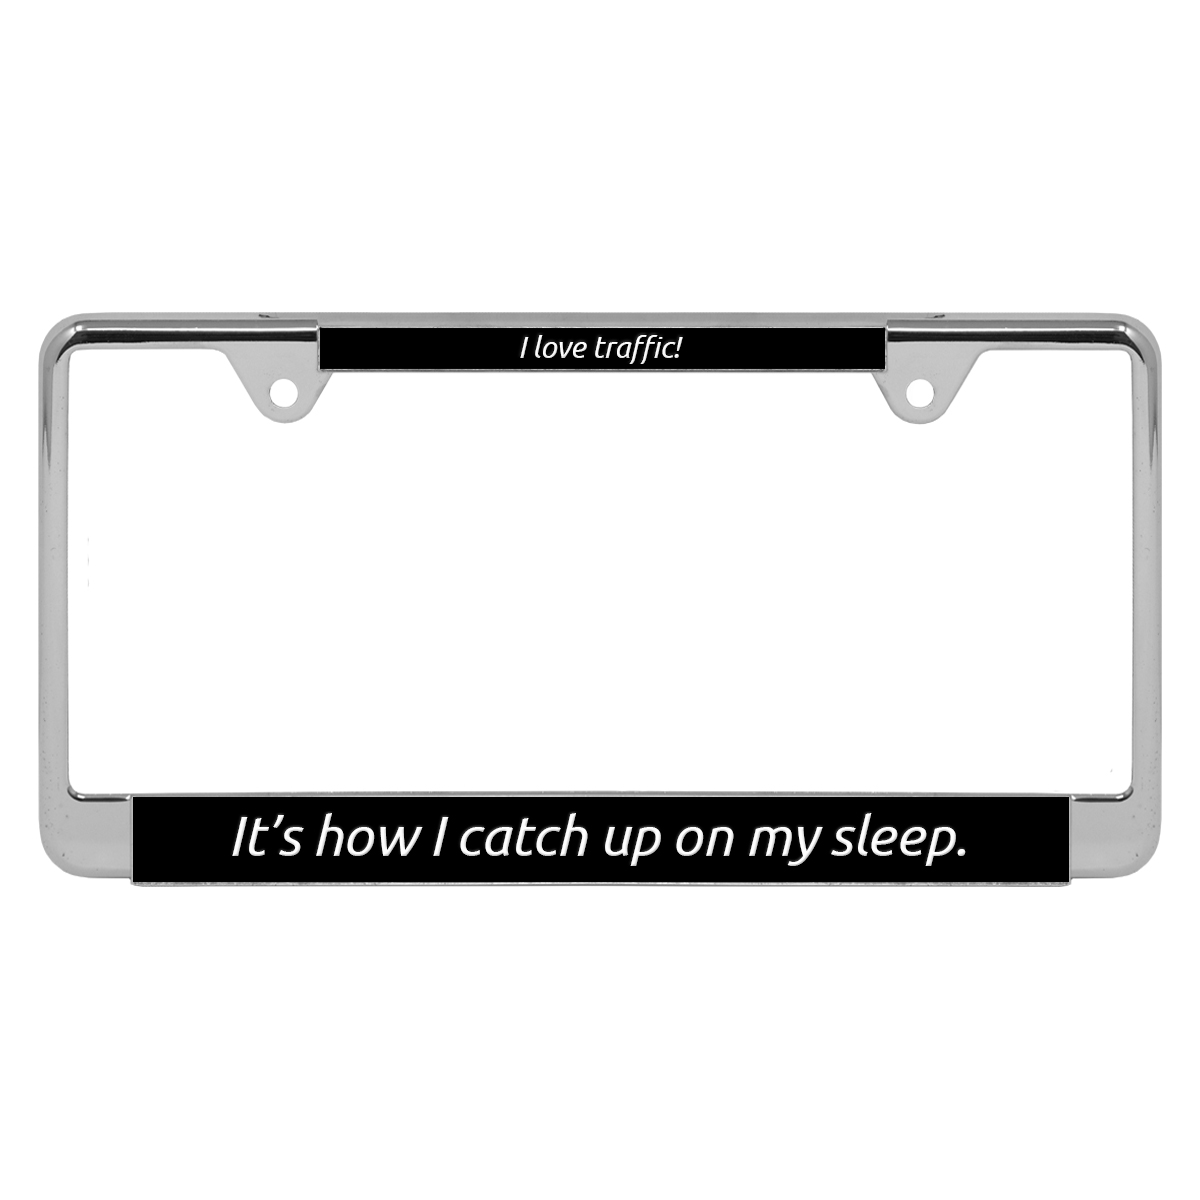 LUTHERAN BY THE GRACE THROUGH FAITH Steel License Plate Frame 